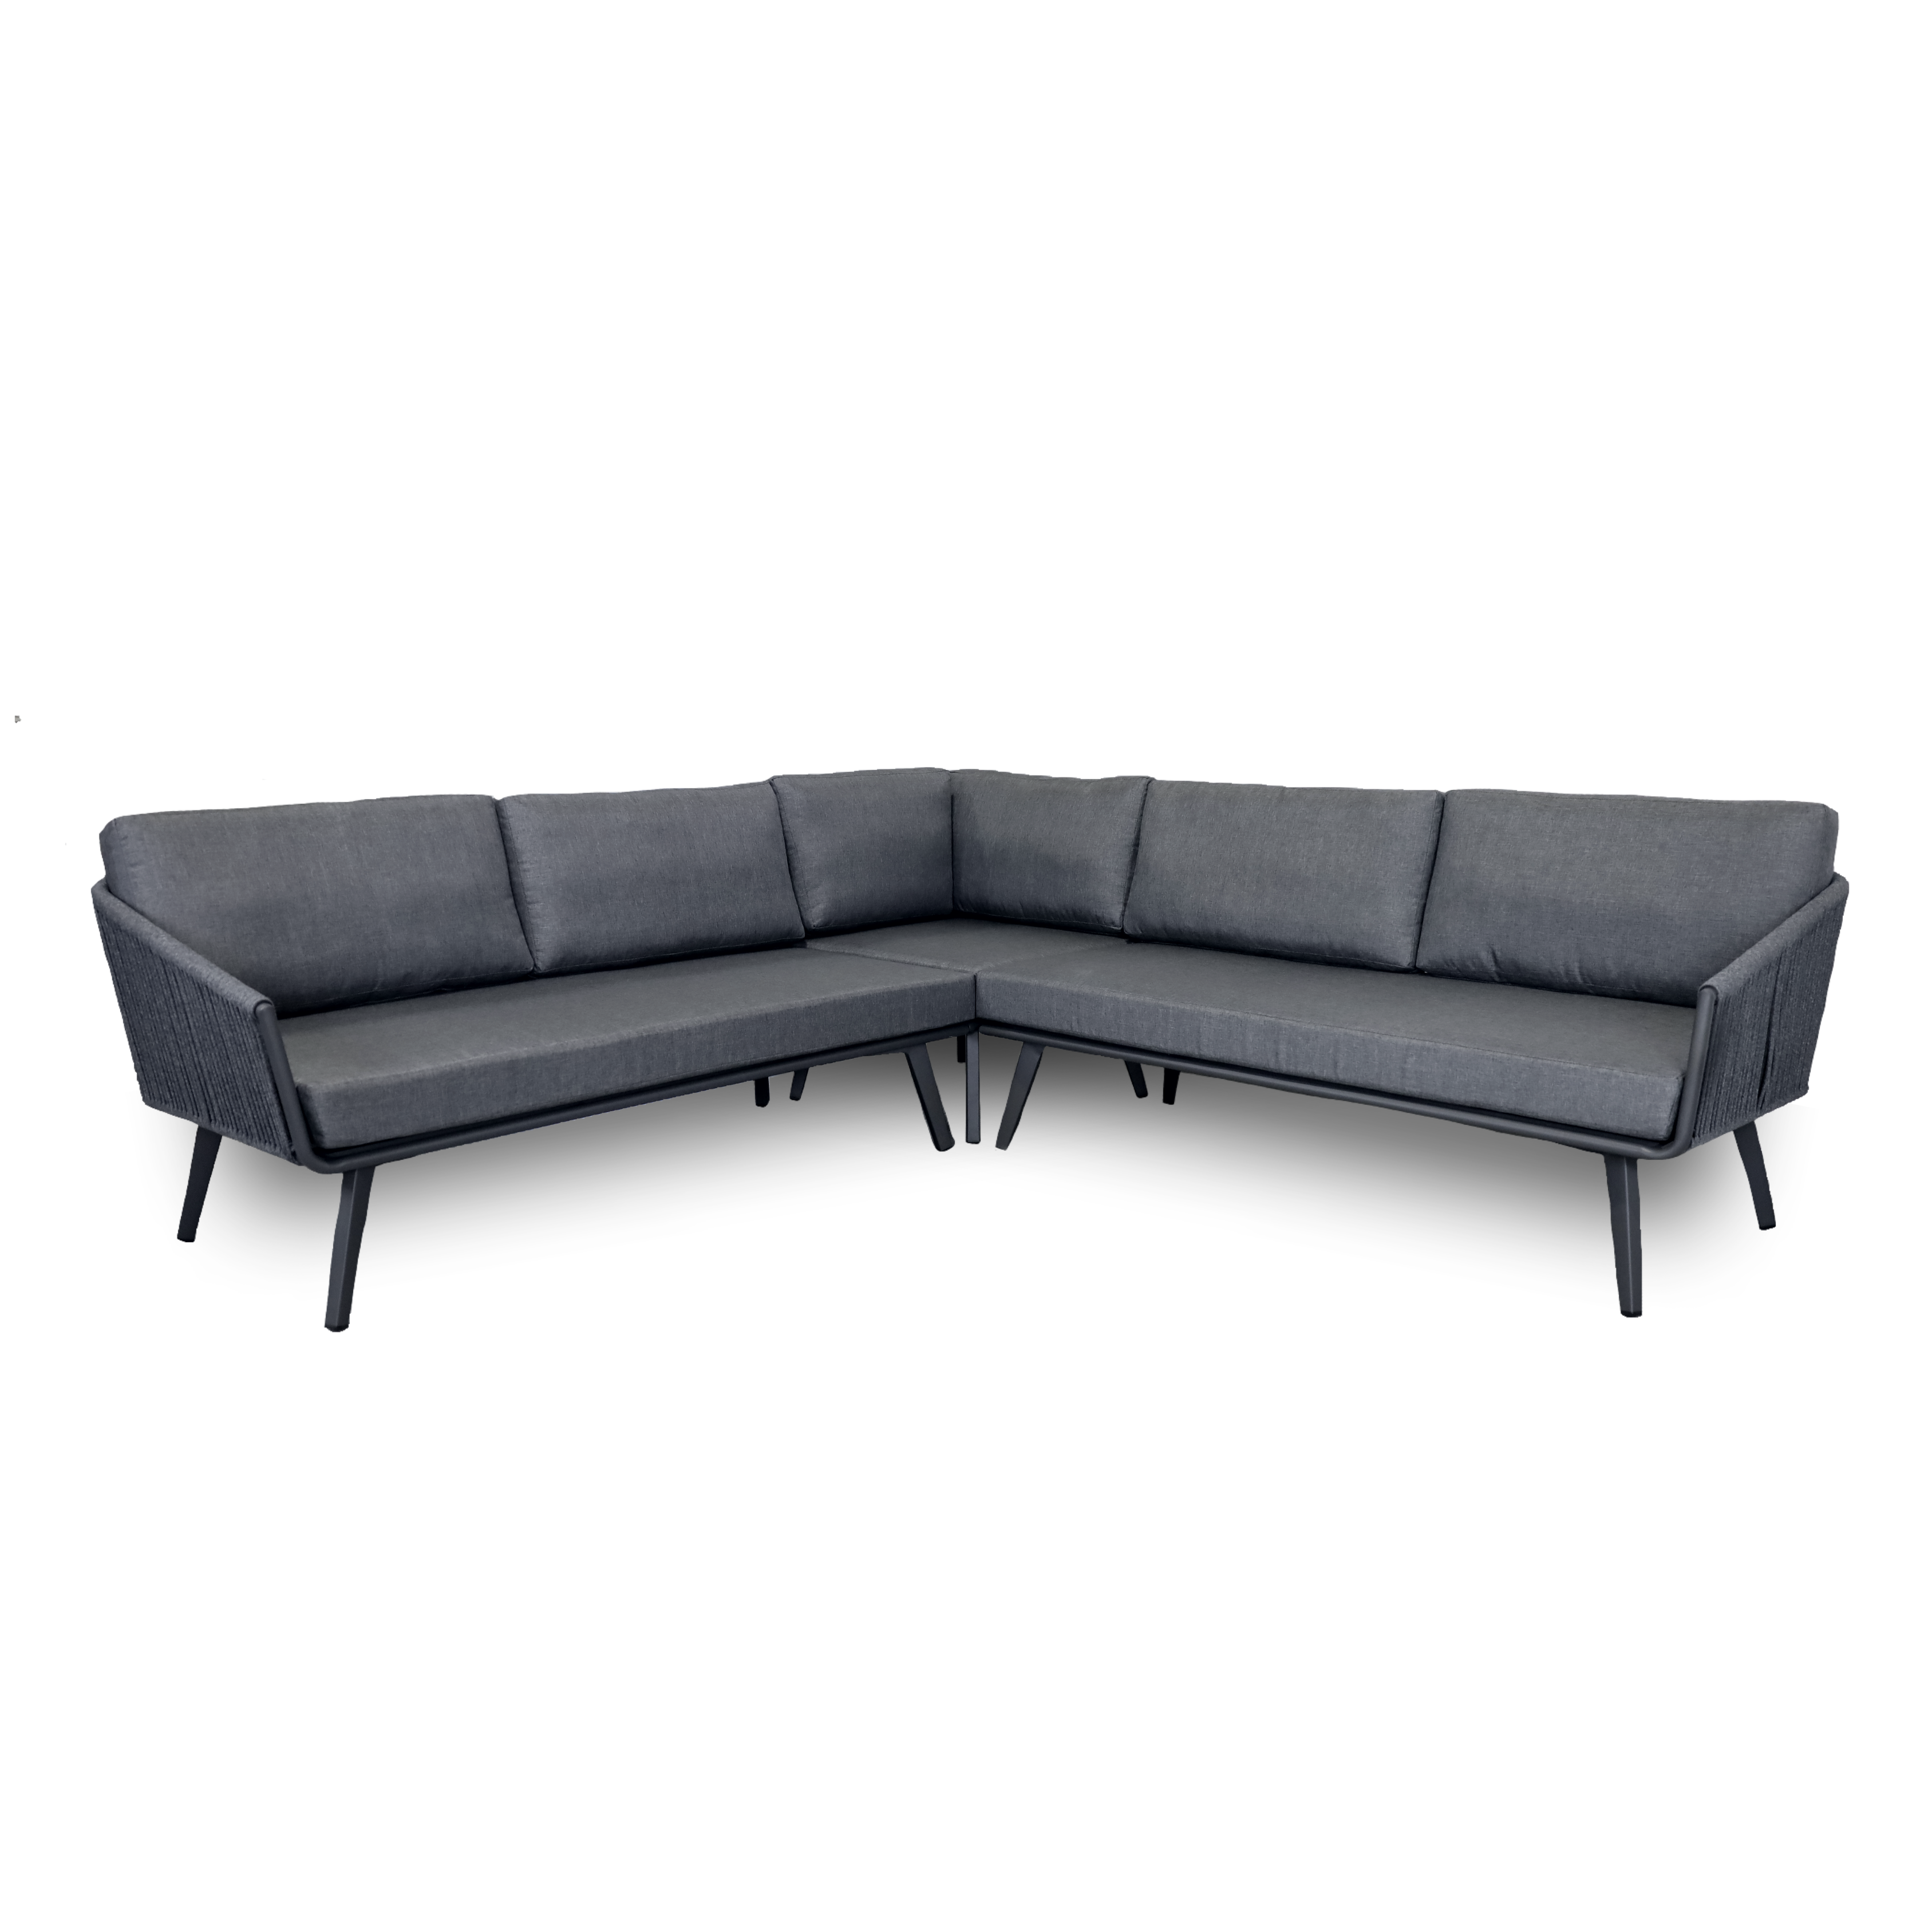 Village Patio Sectional